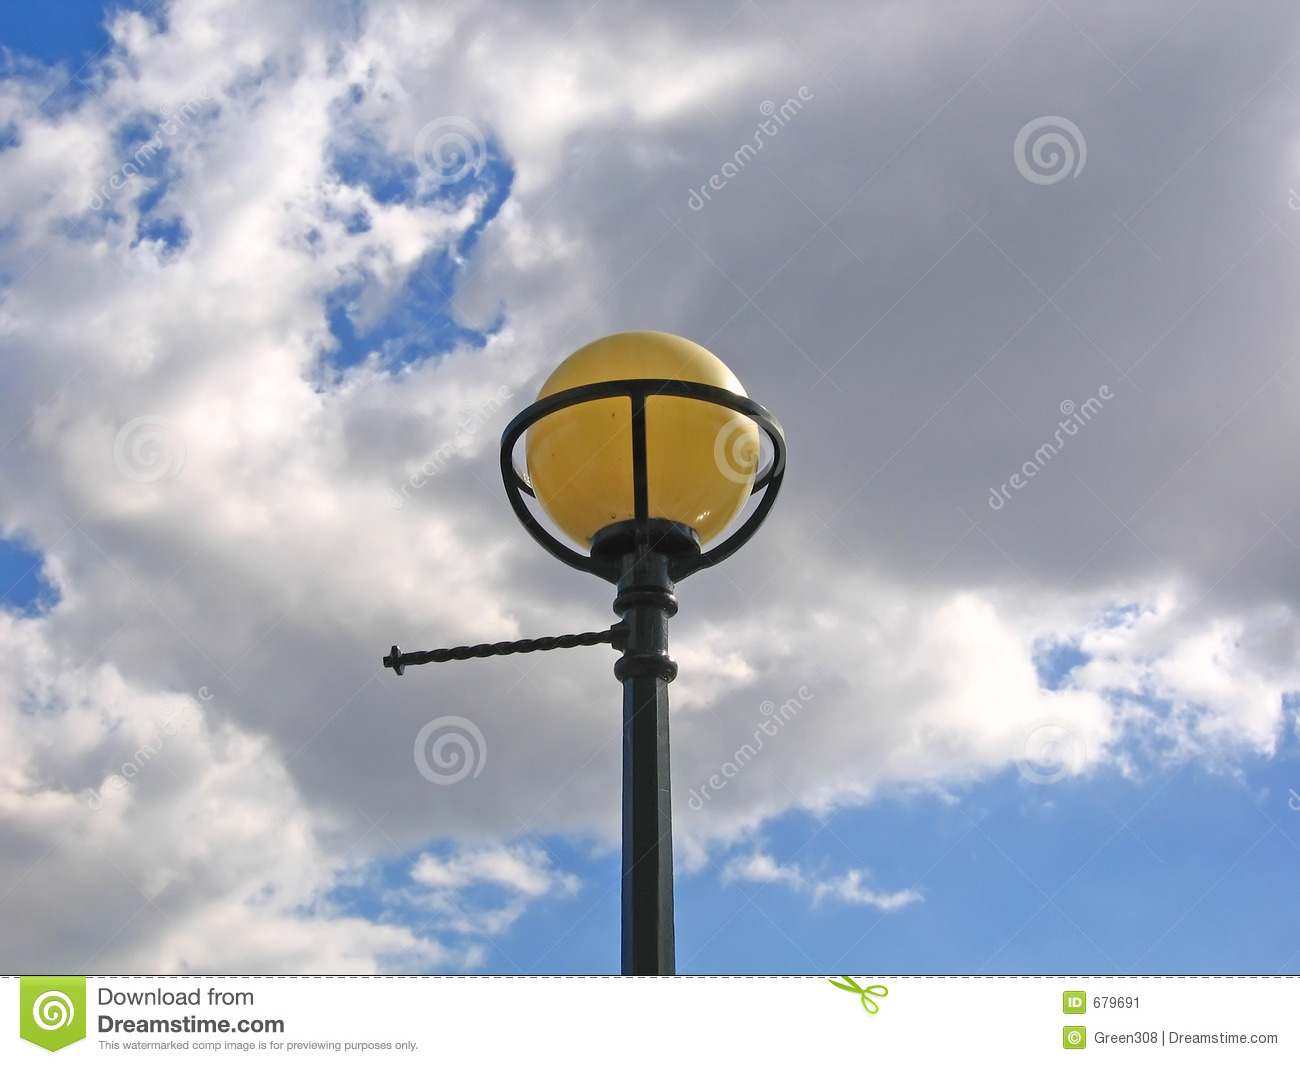 Old Fashioned Globe Street Lamp Against A Cloudy Blue Sky In England 